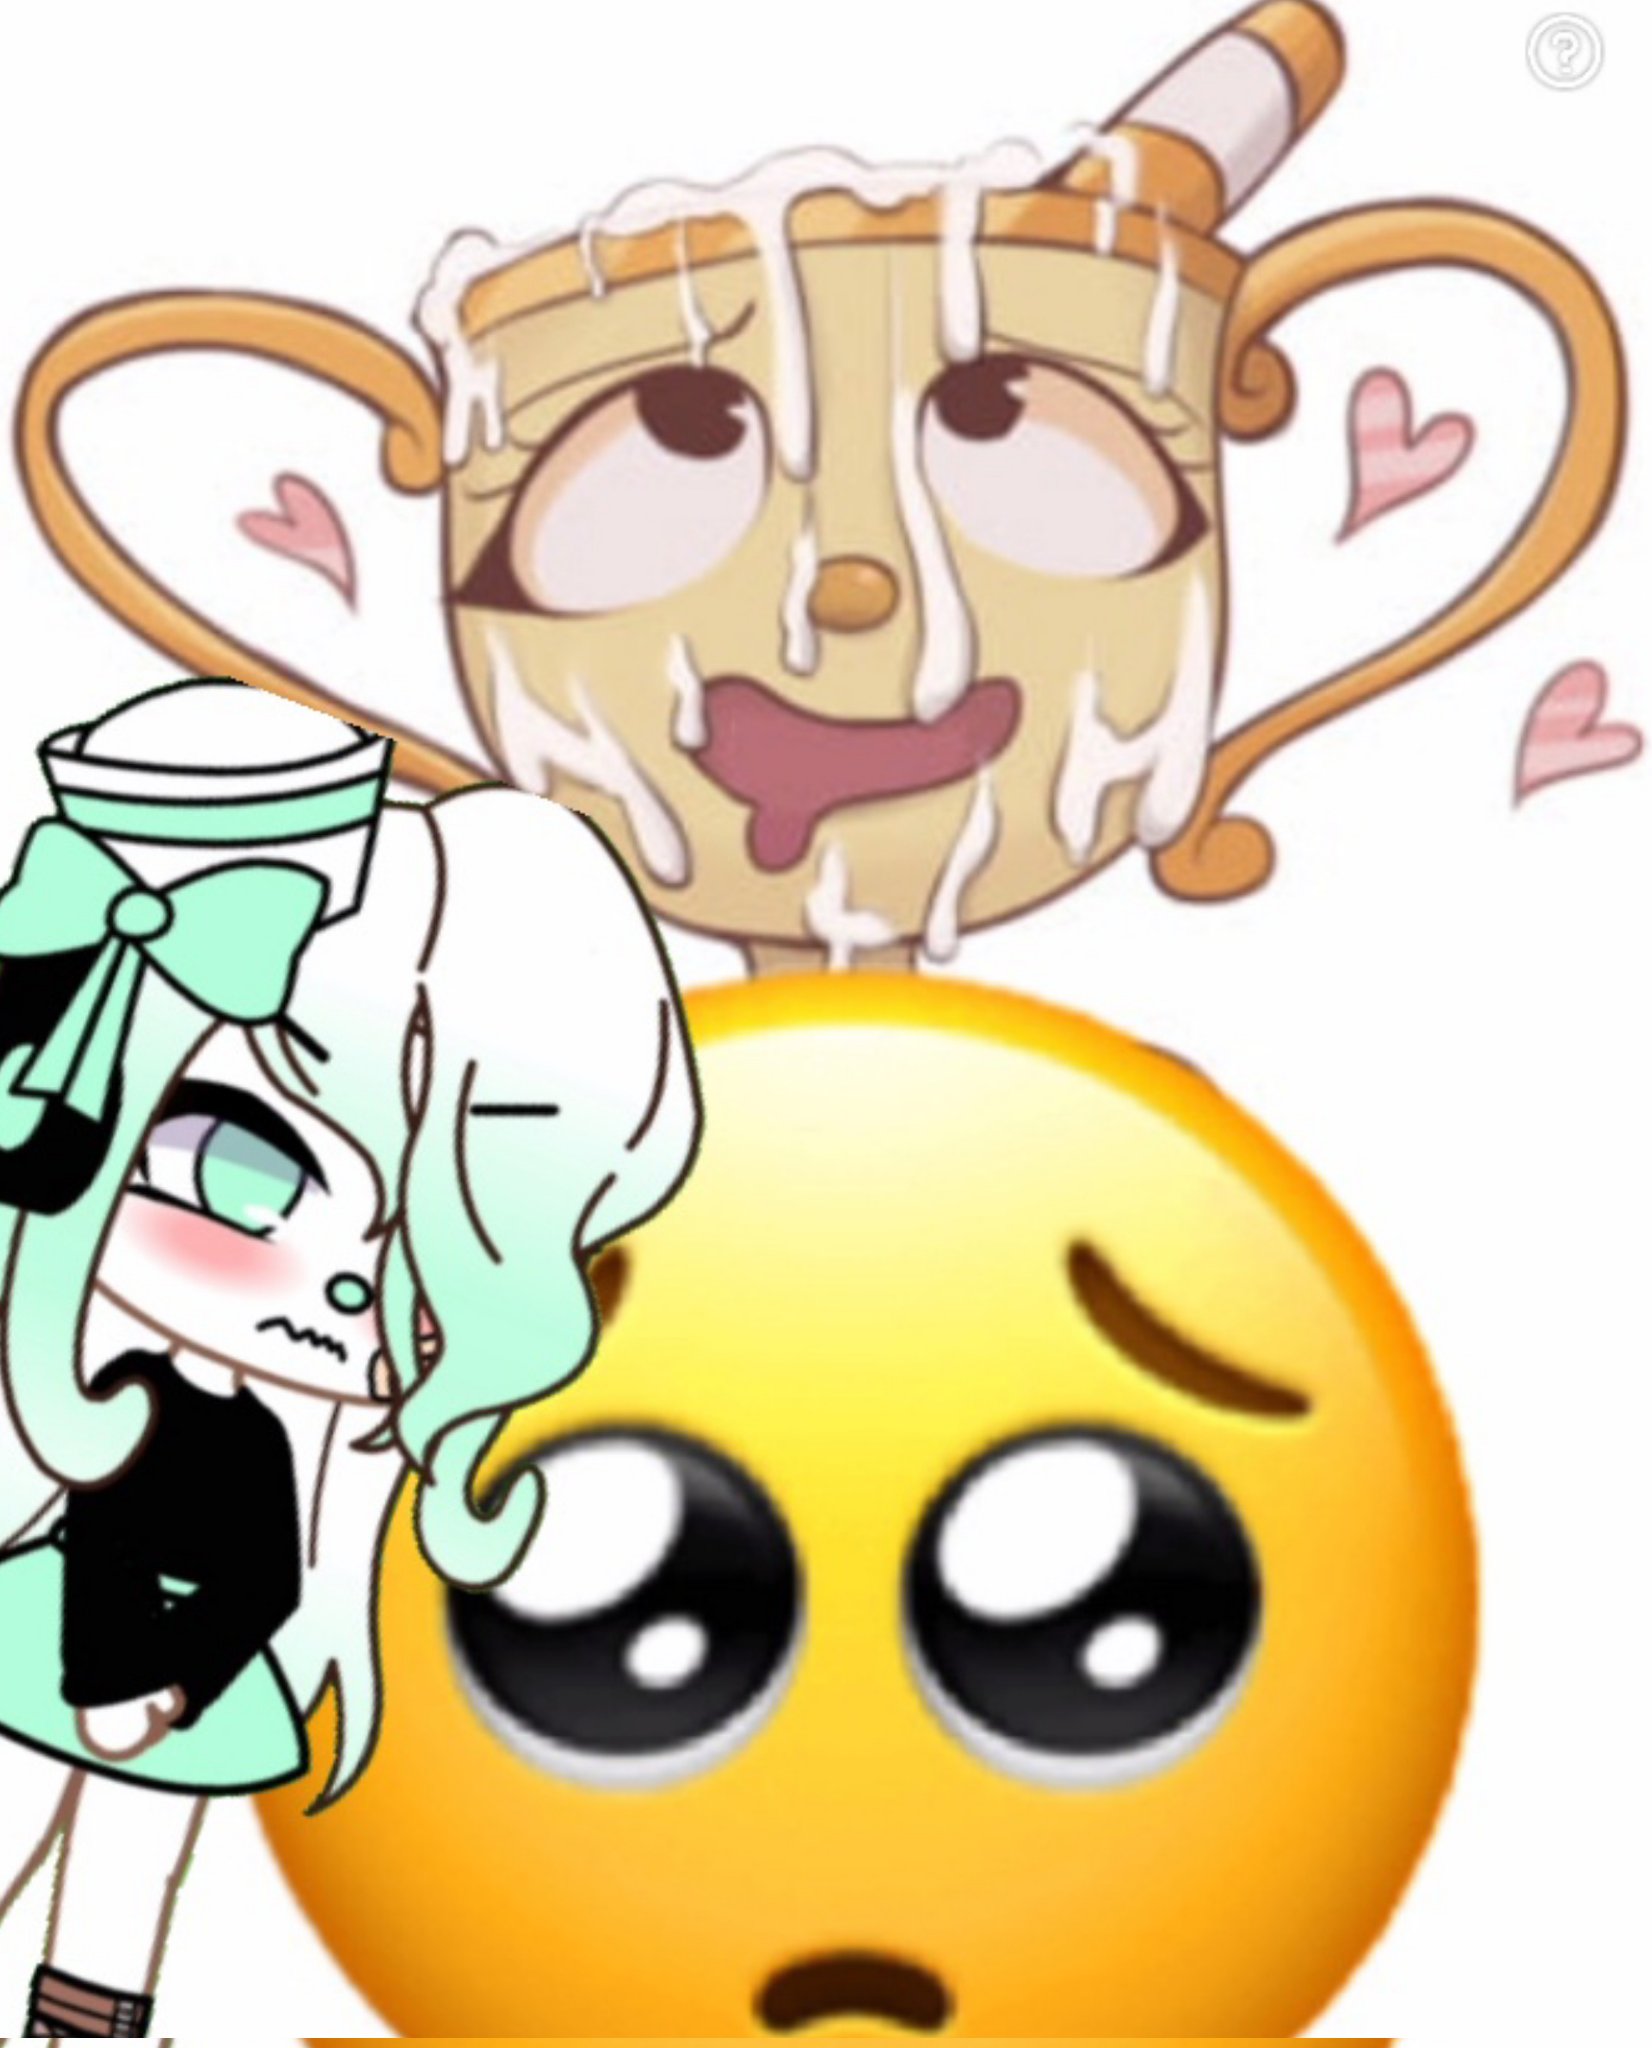 Cupsy Mupsy on X: The cuphead porn problem This is going to be posted on  my channel cupsy mupsy go check it out when it's done  t.coyTRddkGSgb  X